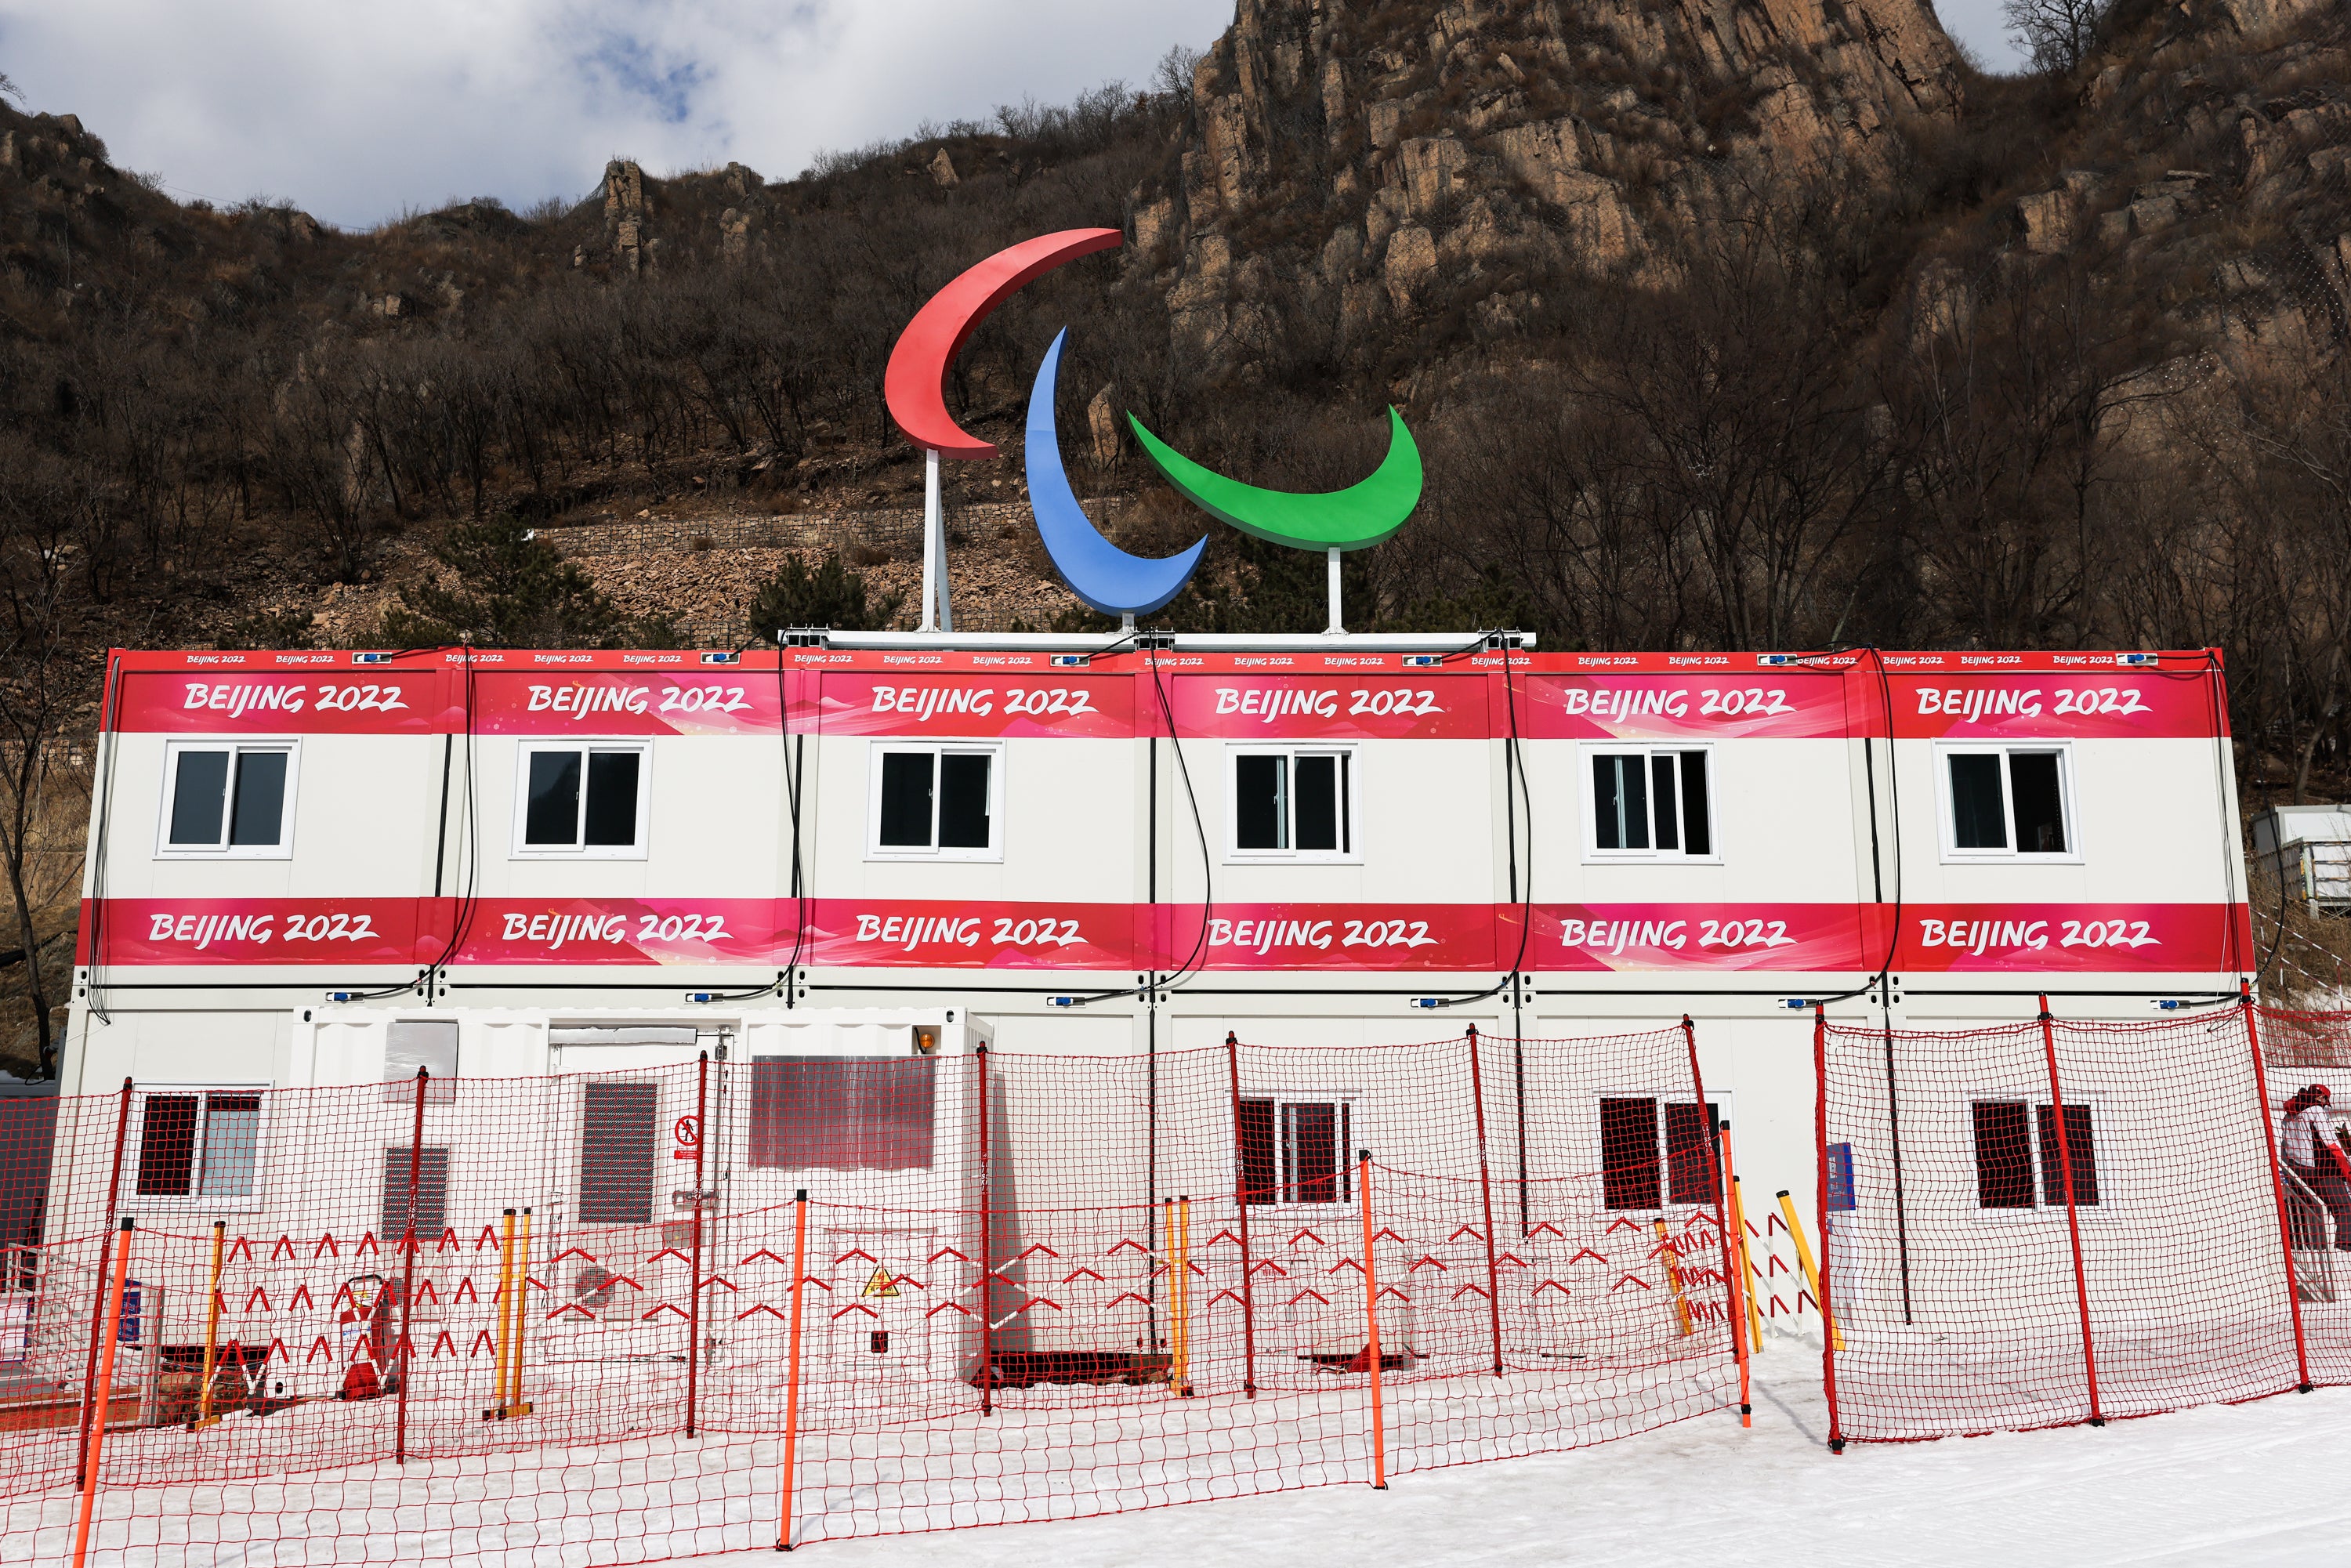 The 2022 Winter Paralympics will be held in Beijing